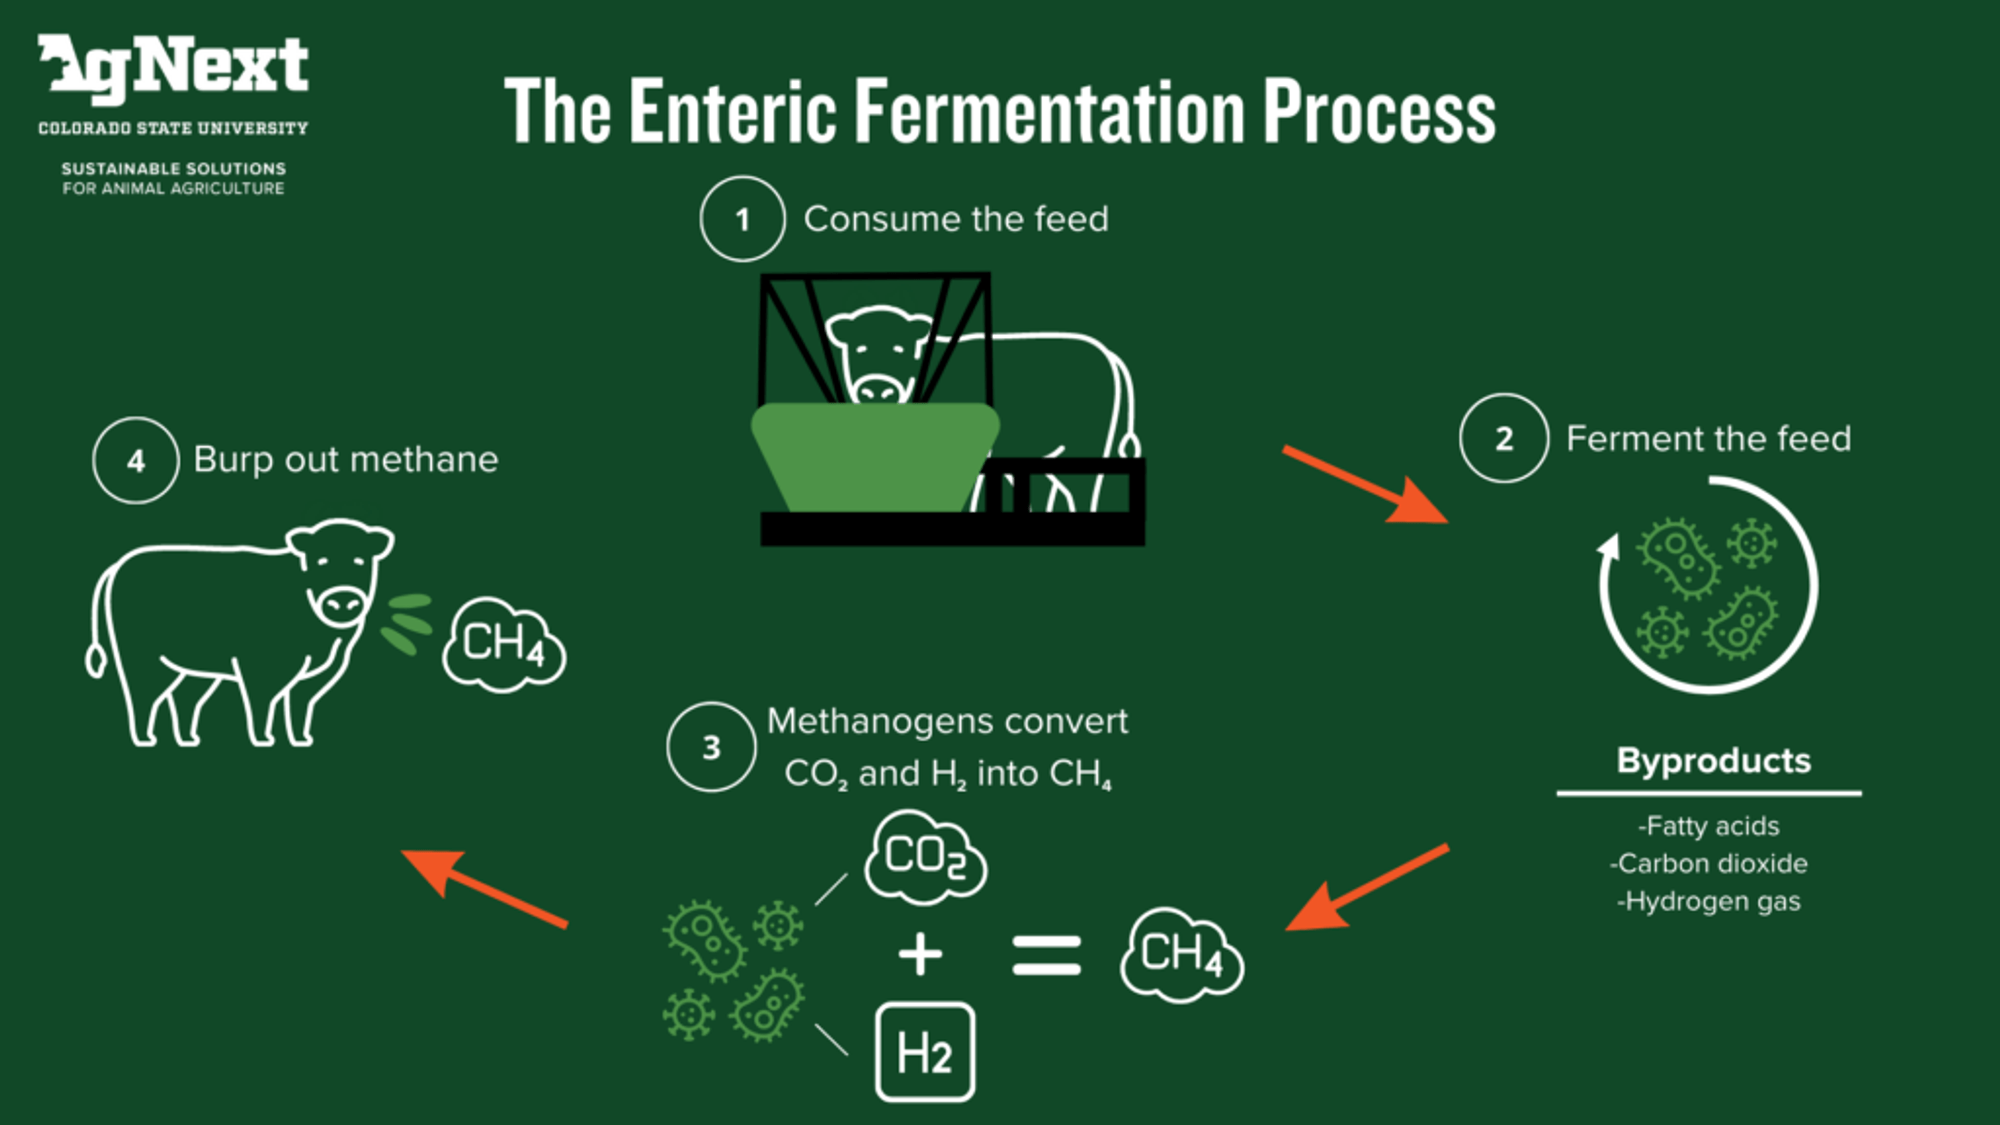 A graphic shows the enteric fermentation process in four steps. 1) Livestock consume feed. 2) Ferment the feed, with byproducts of fatty acids, carbon dioxide, and hydrogen gas. 3) Methanogens convert carbon dioxide and hydrogen gas into methane. 4) Livestock burp out methane. Image courtesy of CSU AgNext. 